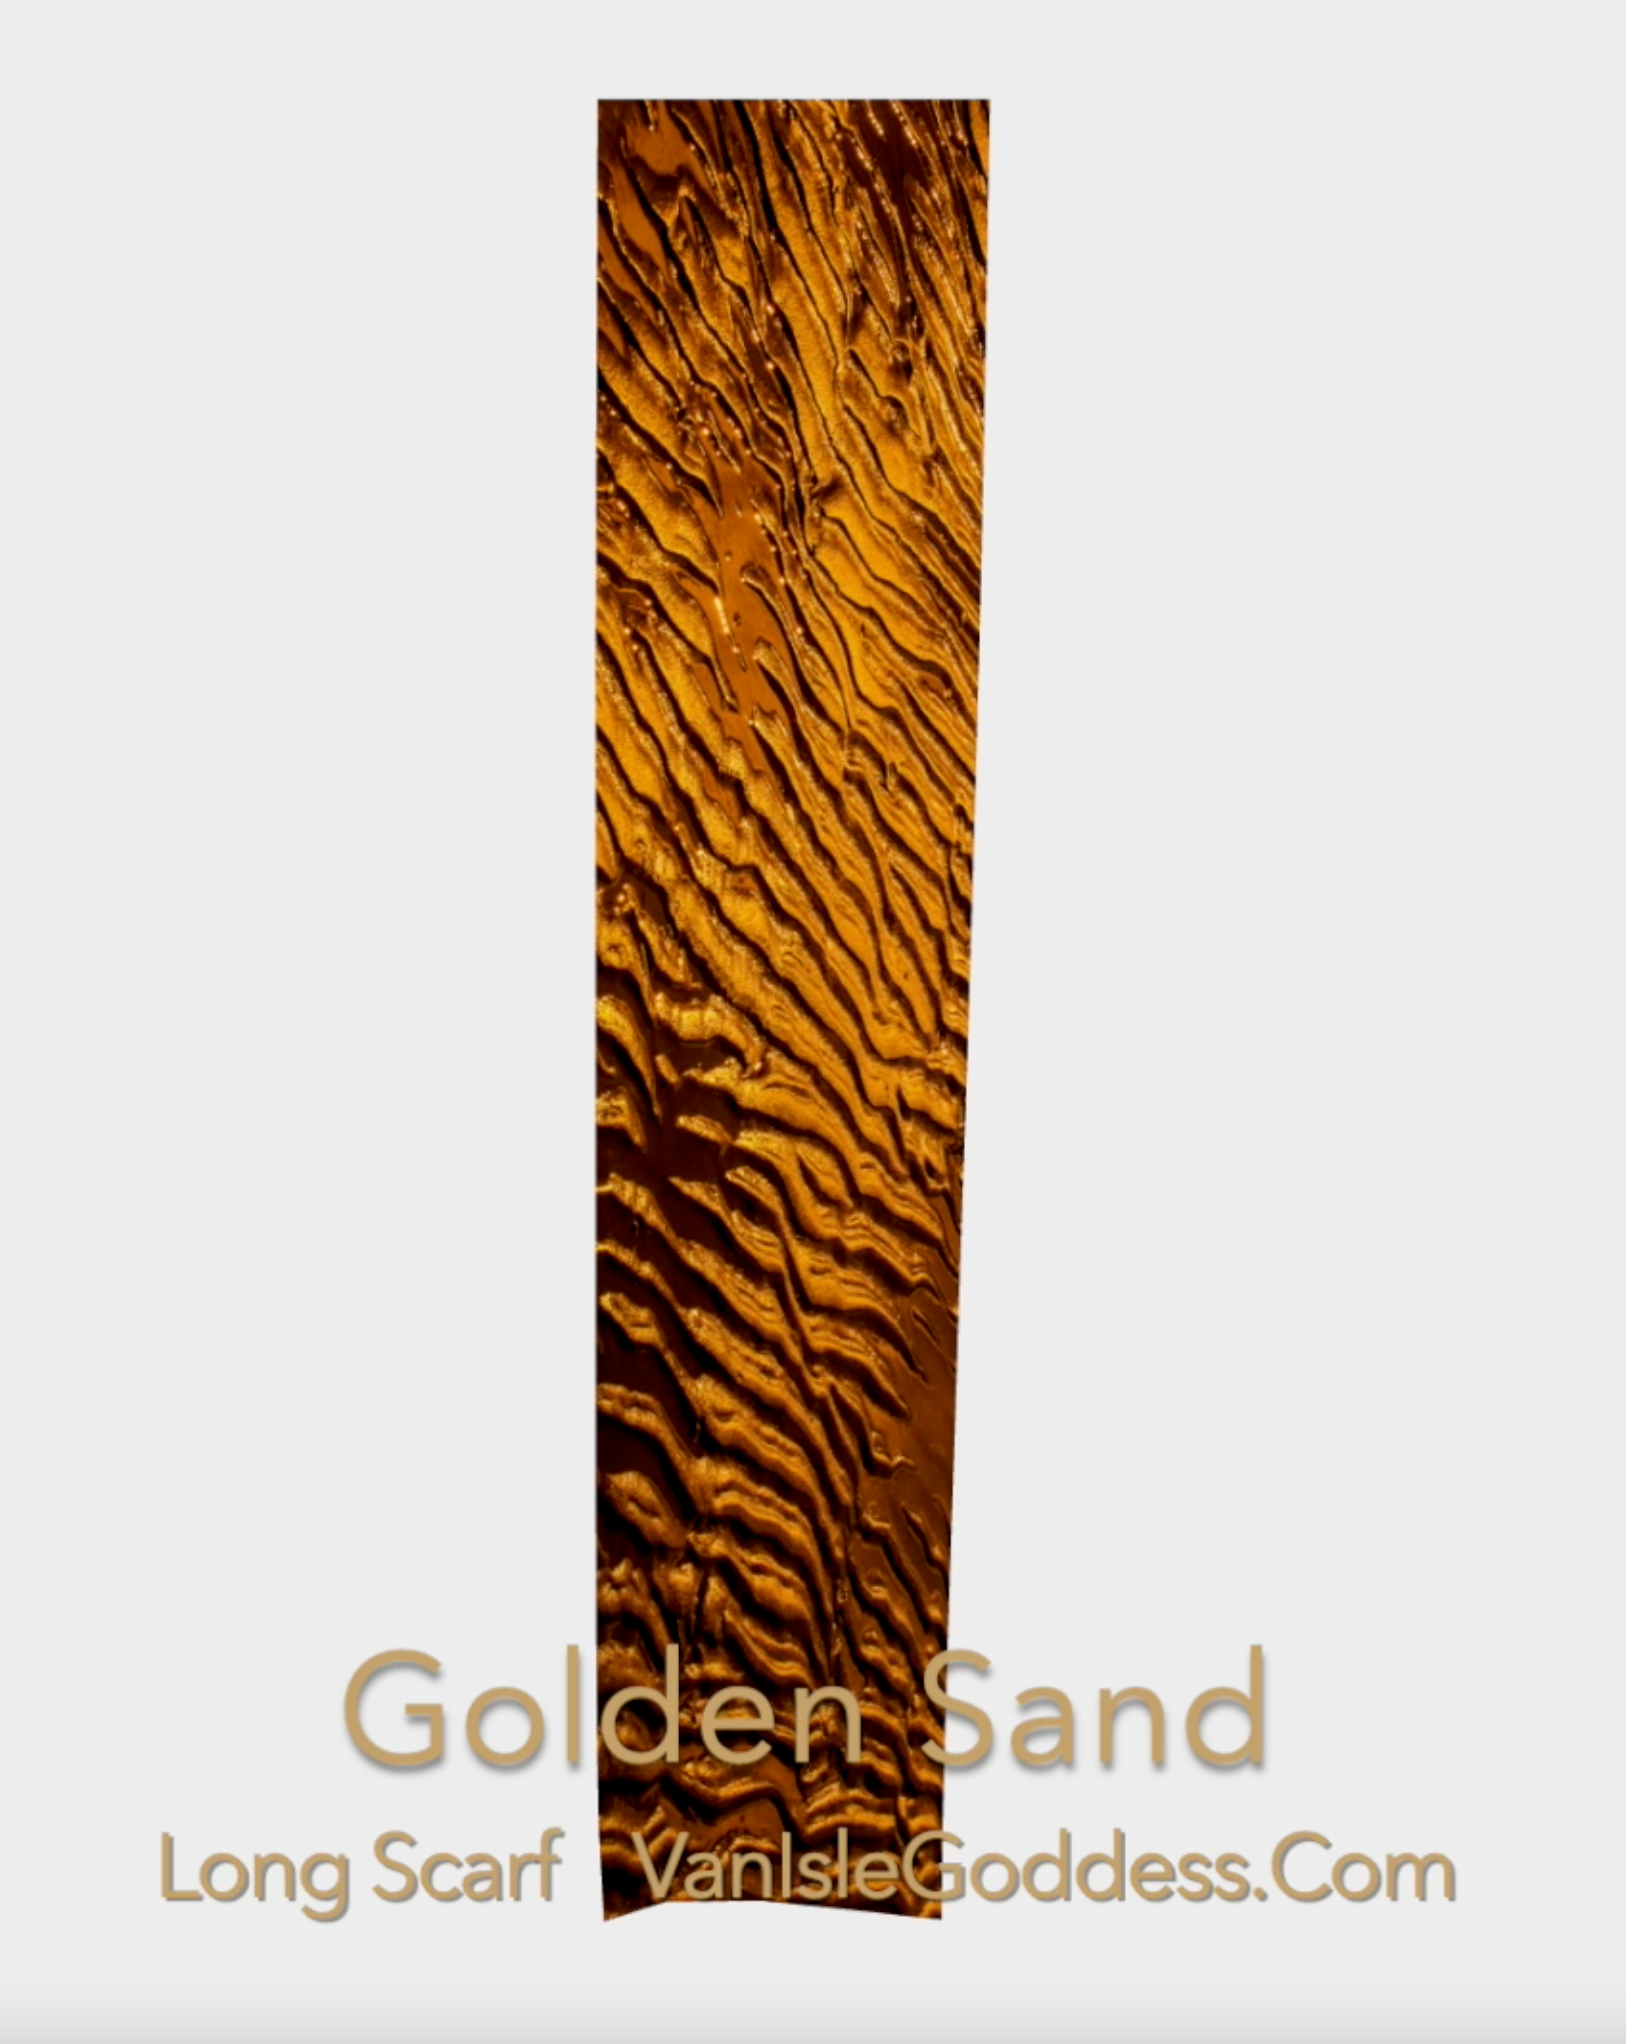 Golden Sand long scarf is shown in its full length to show the complete design.